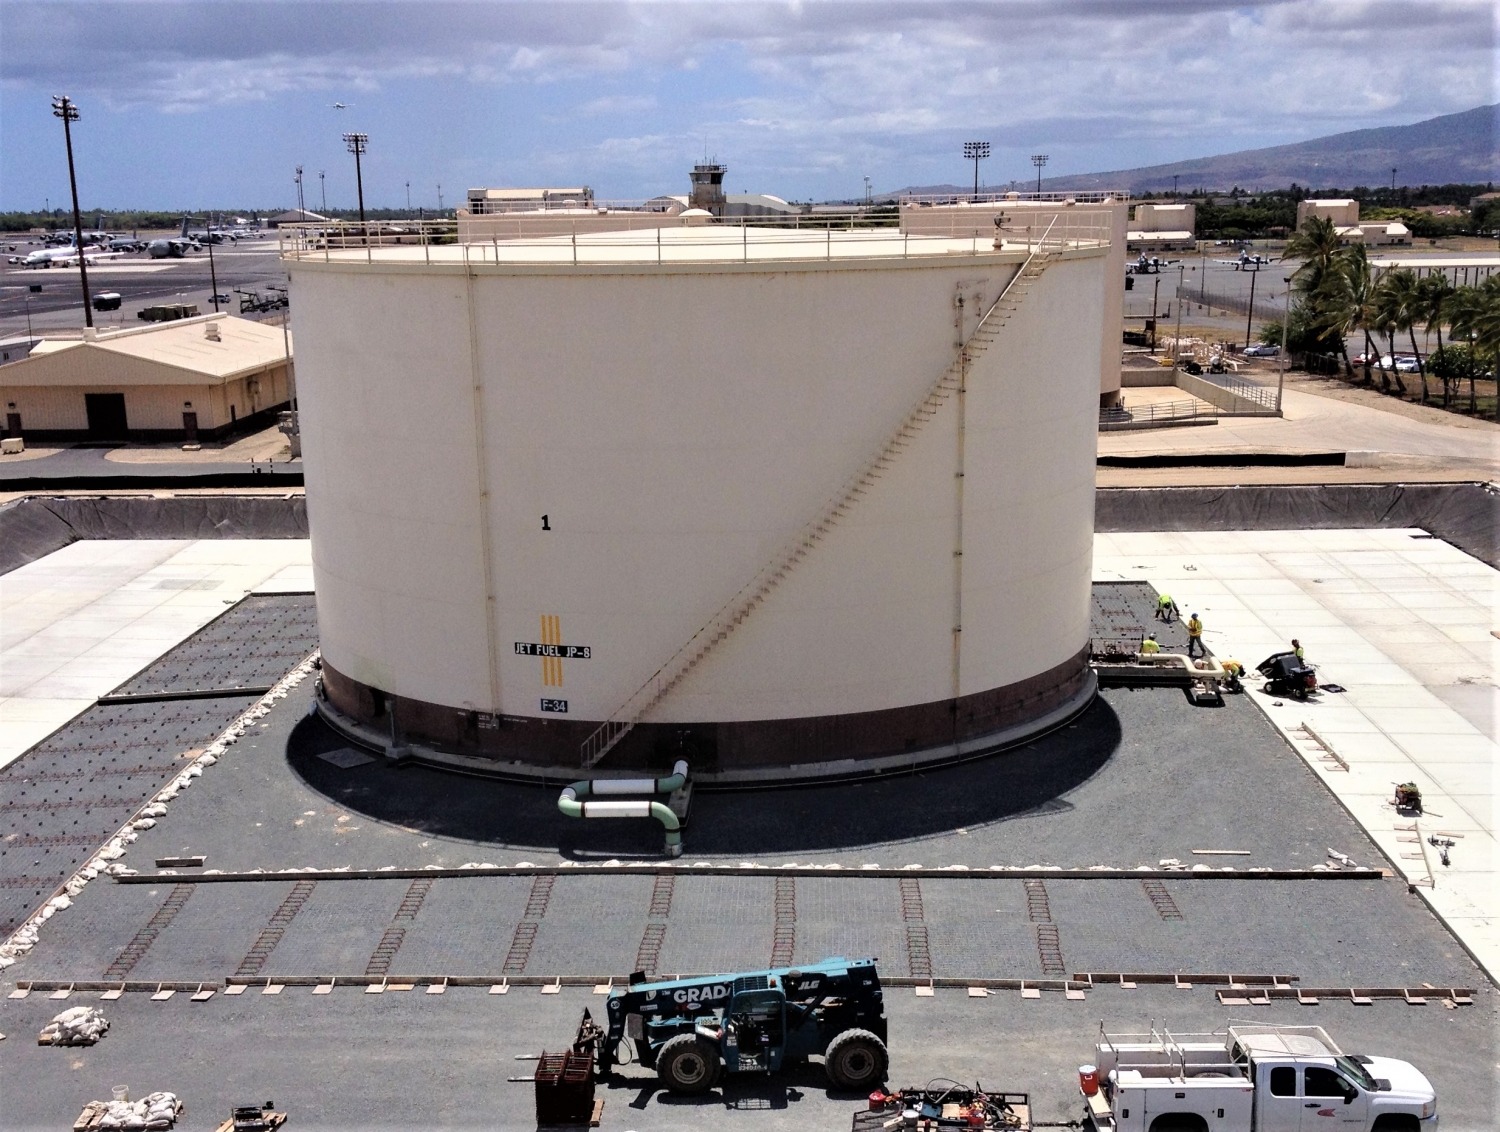 A new Fuel Storage Tank at the Hickman Air Force Base